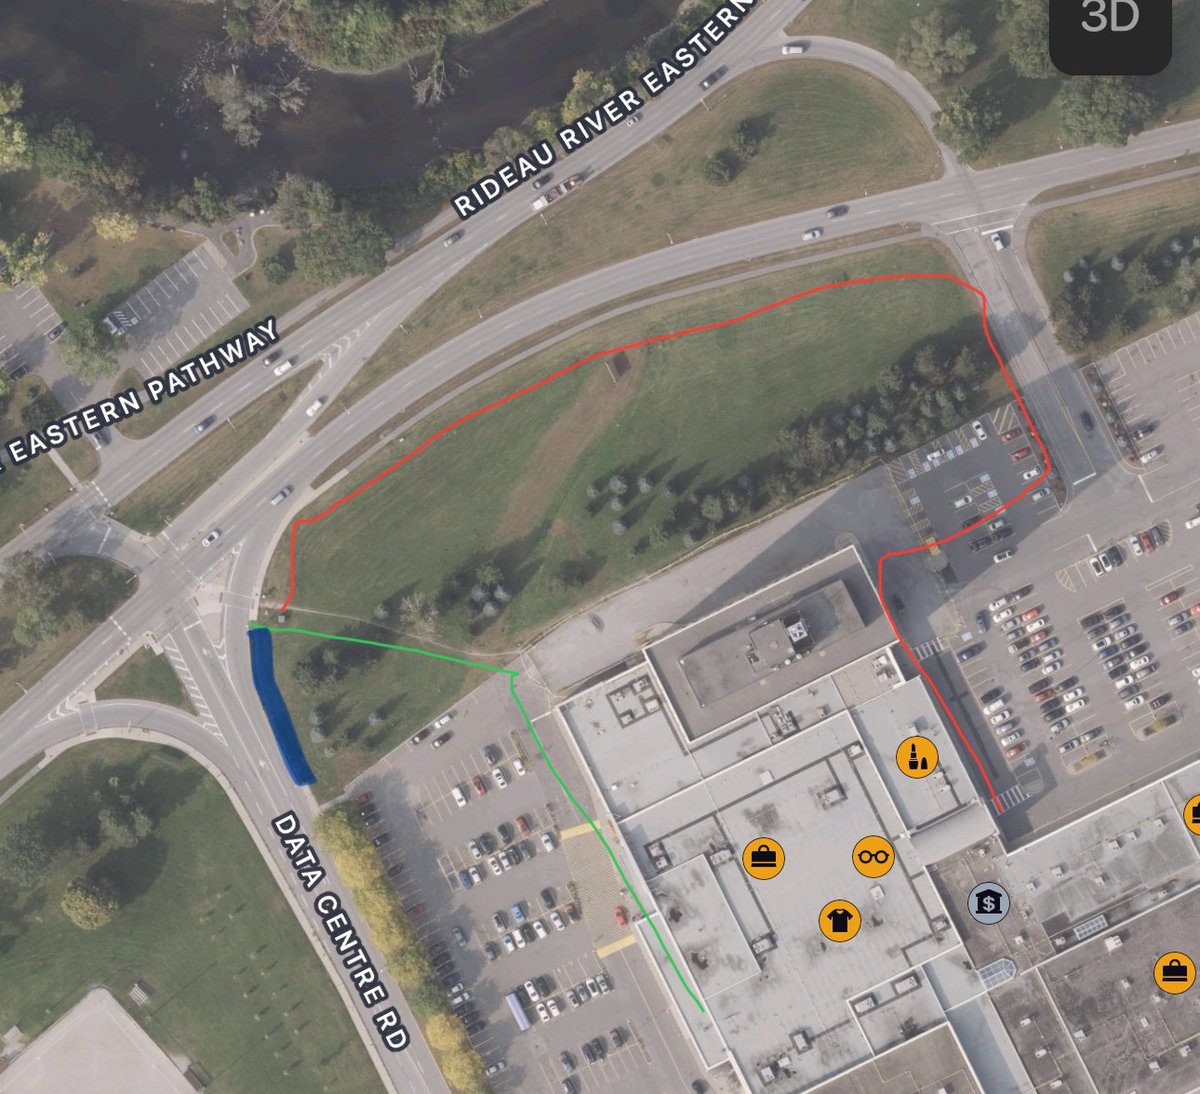 Desire line is strong here. Even if they finished the little bit of sidewalk (in blue) to get to the lot vs going through the dirt. Or, make the desire line real. #ottWalk #ottRoll